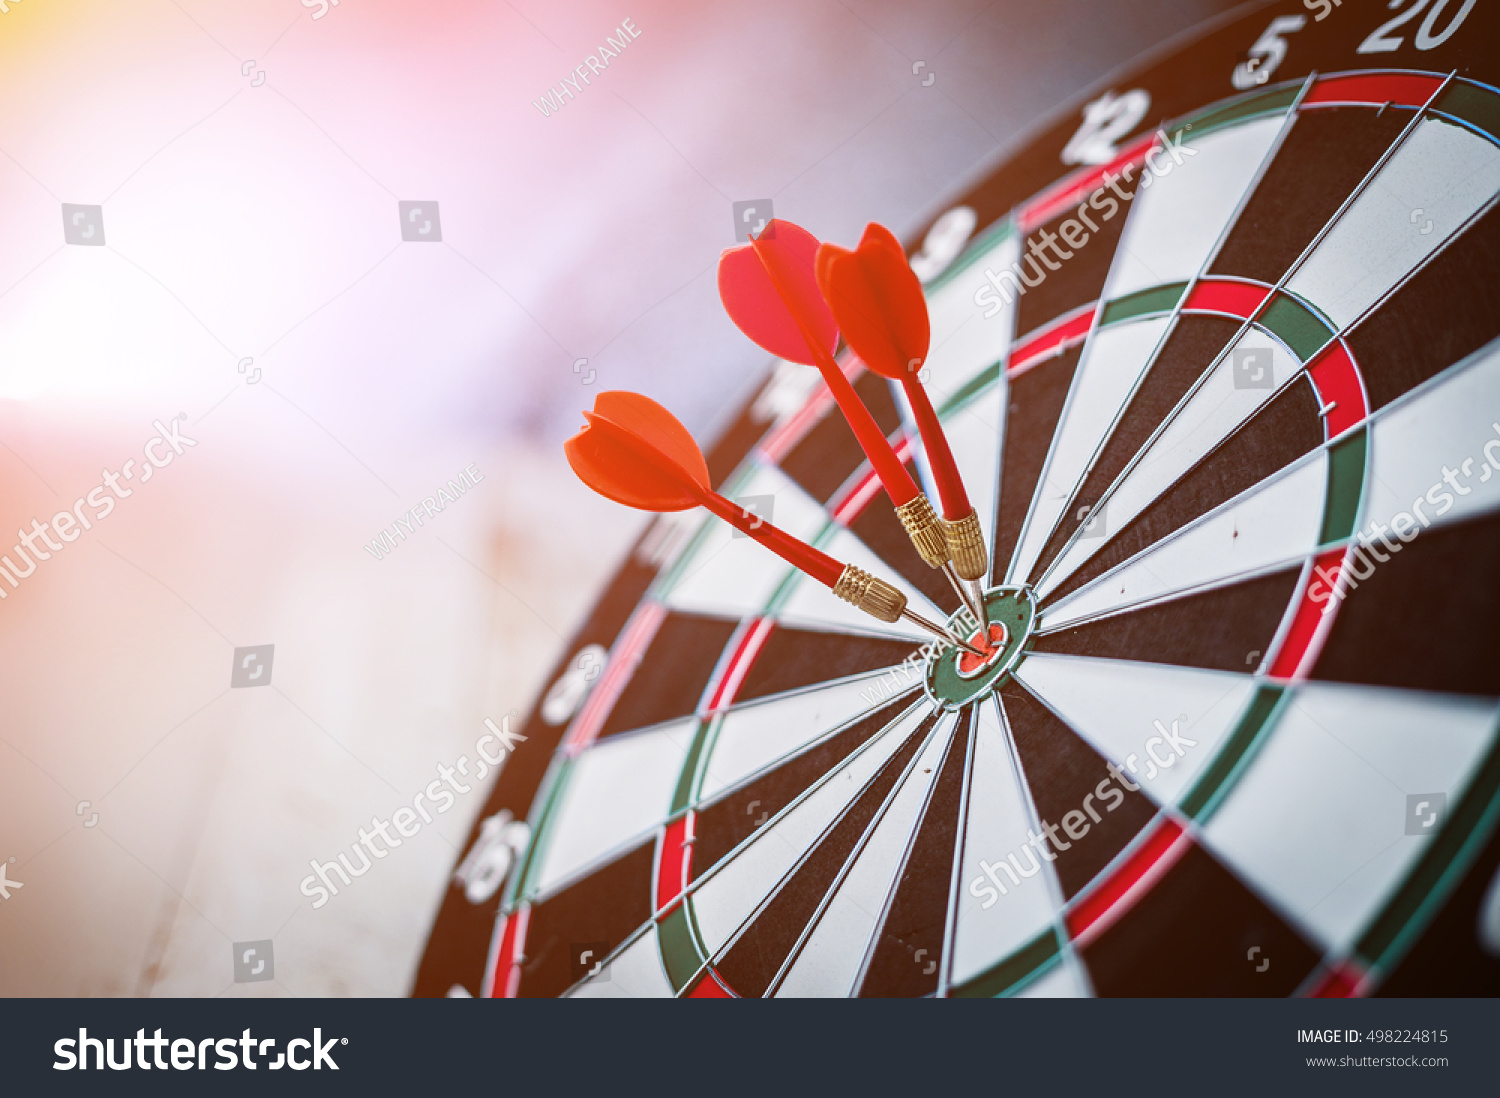 red three darts arrows in the target center business goal concept #498224815